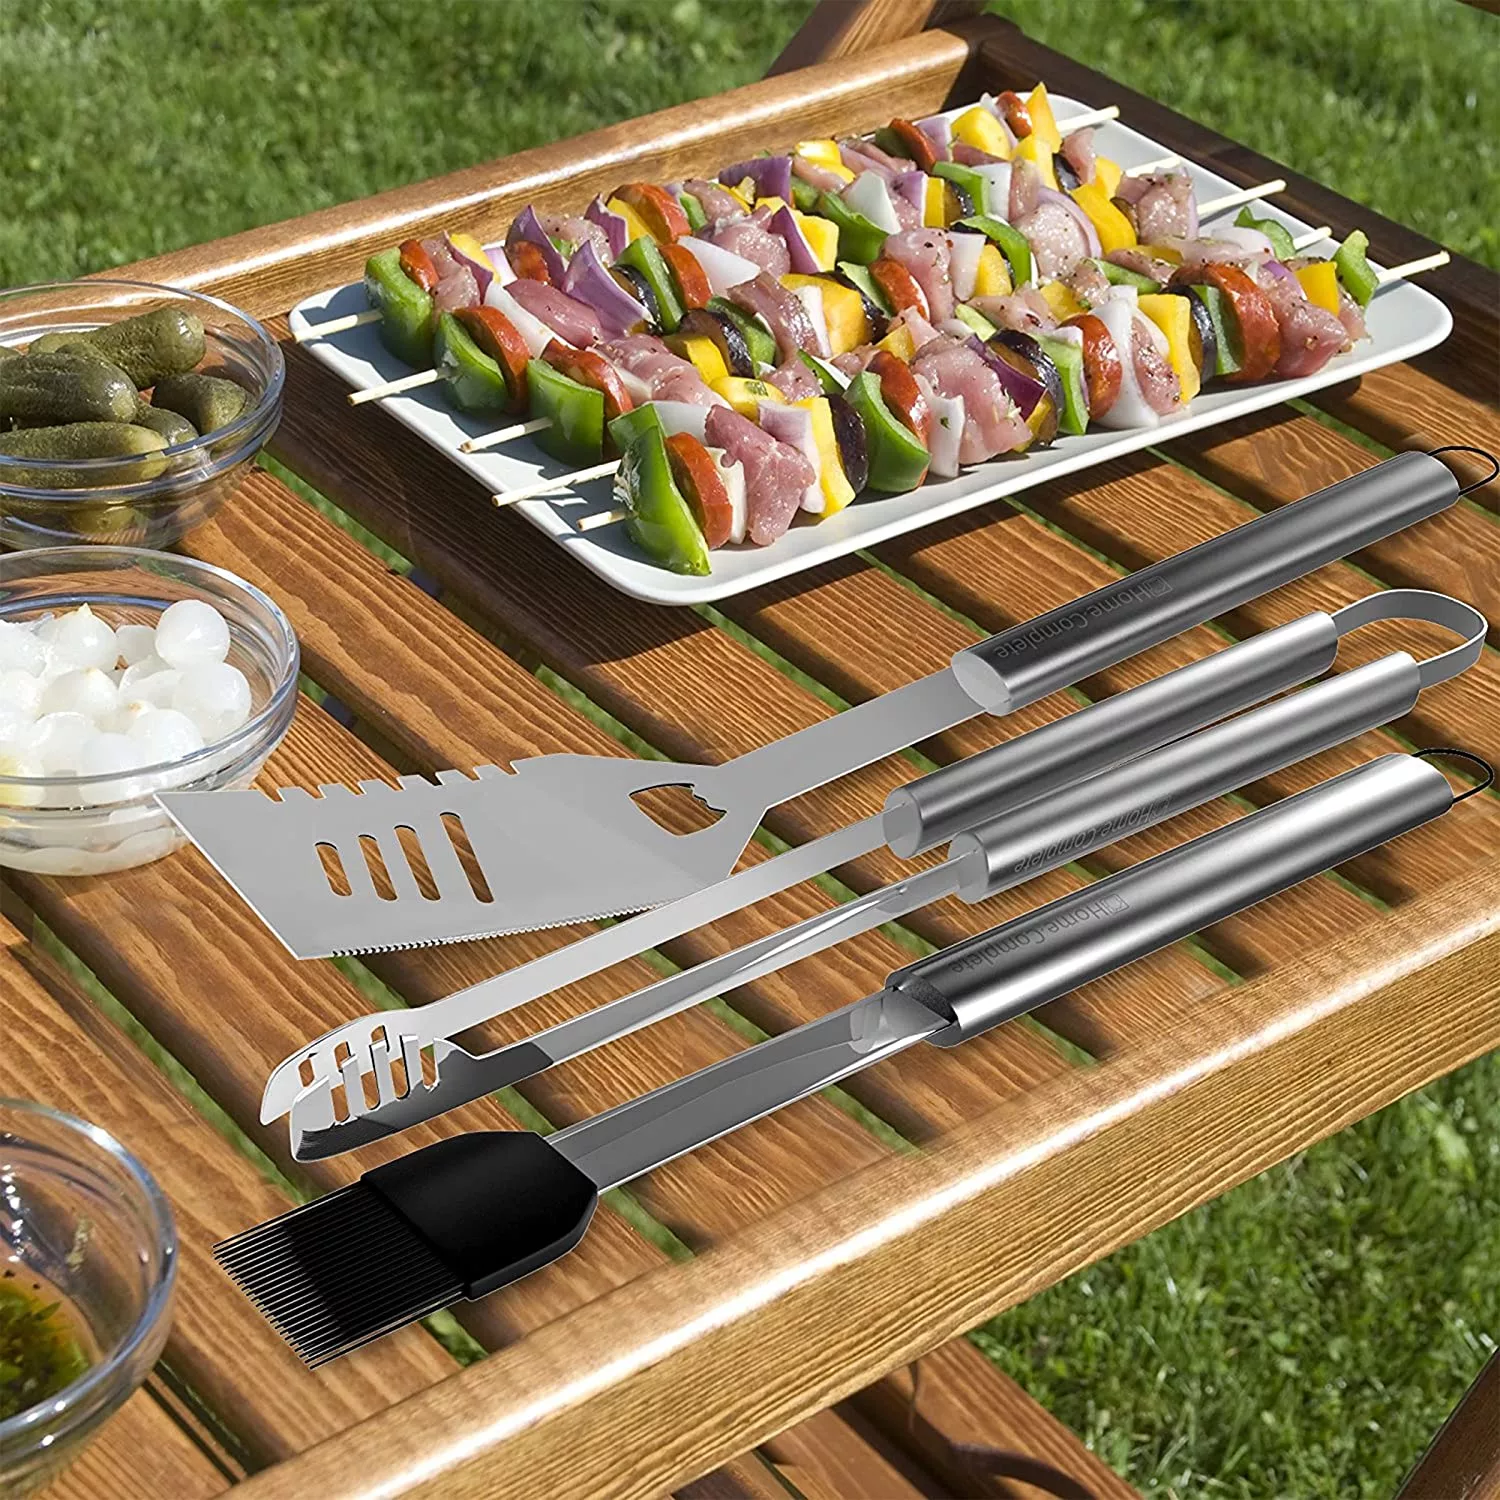 Home-Complete 16 Piece Grill Set On Picnic Table